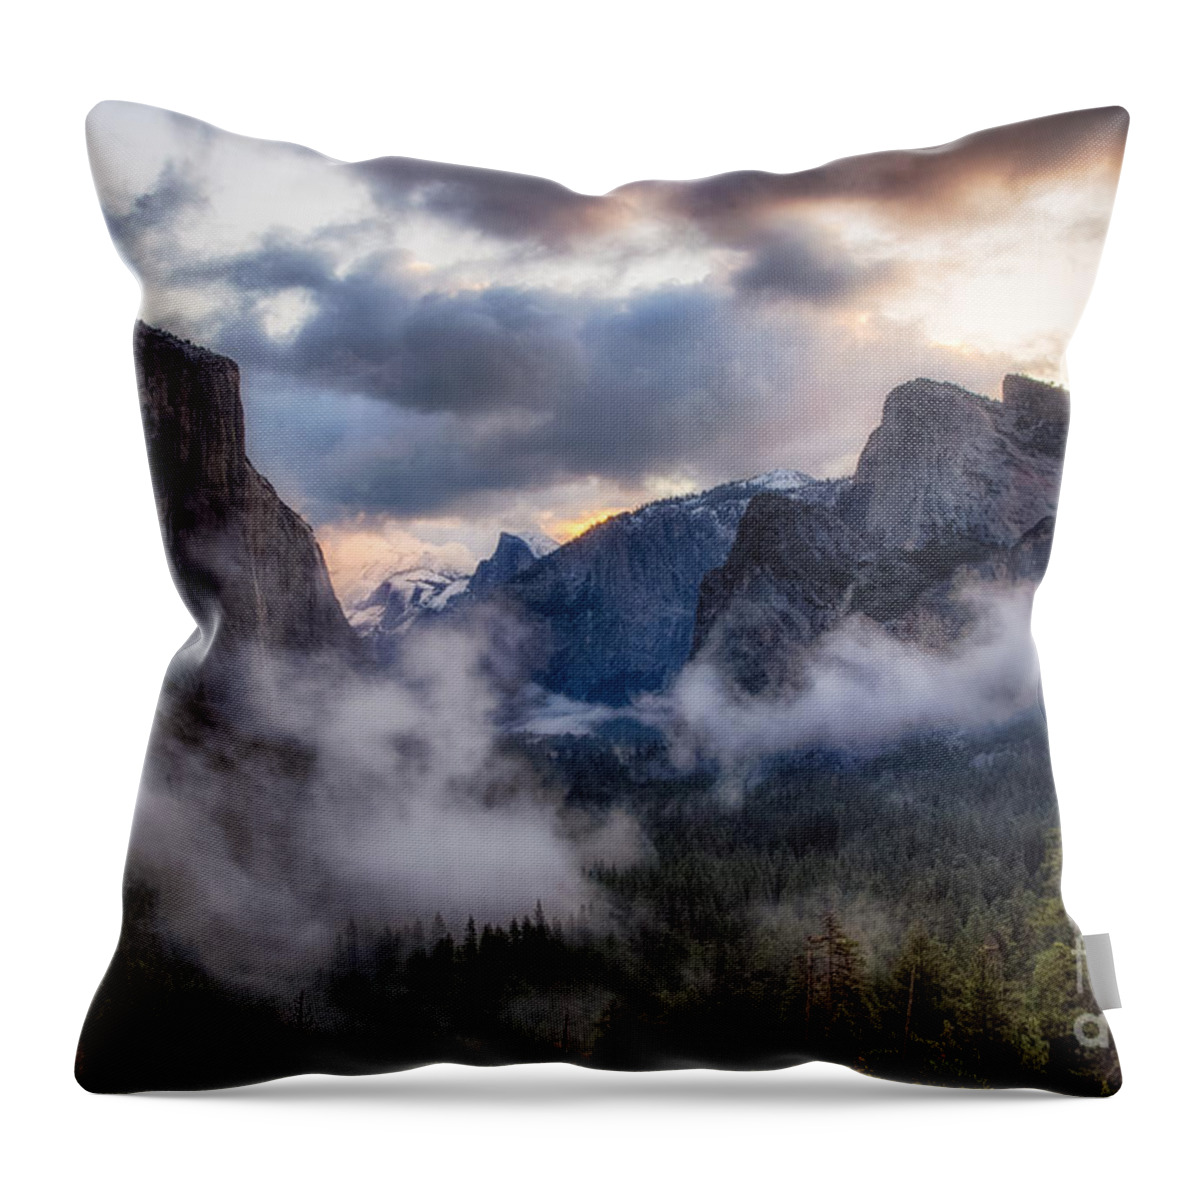 Yosemite Throw Pillow featuring the photograph Sunrise Yosemite by Anthony Michael Bonafede